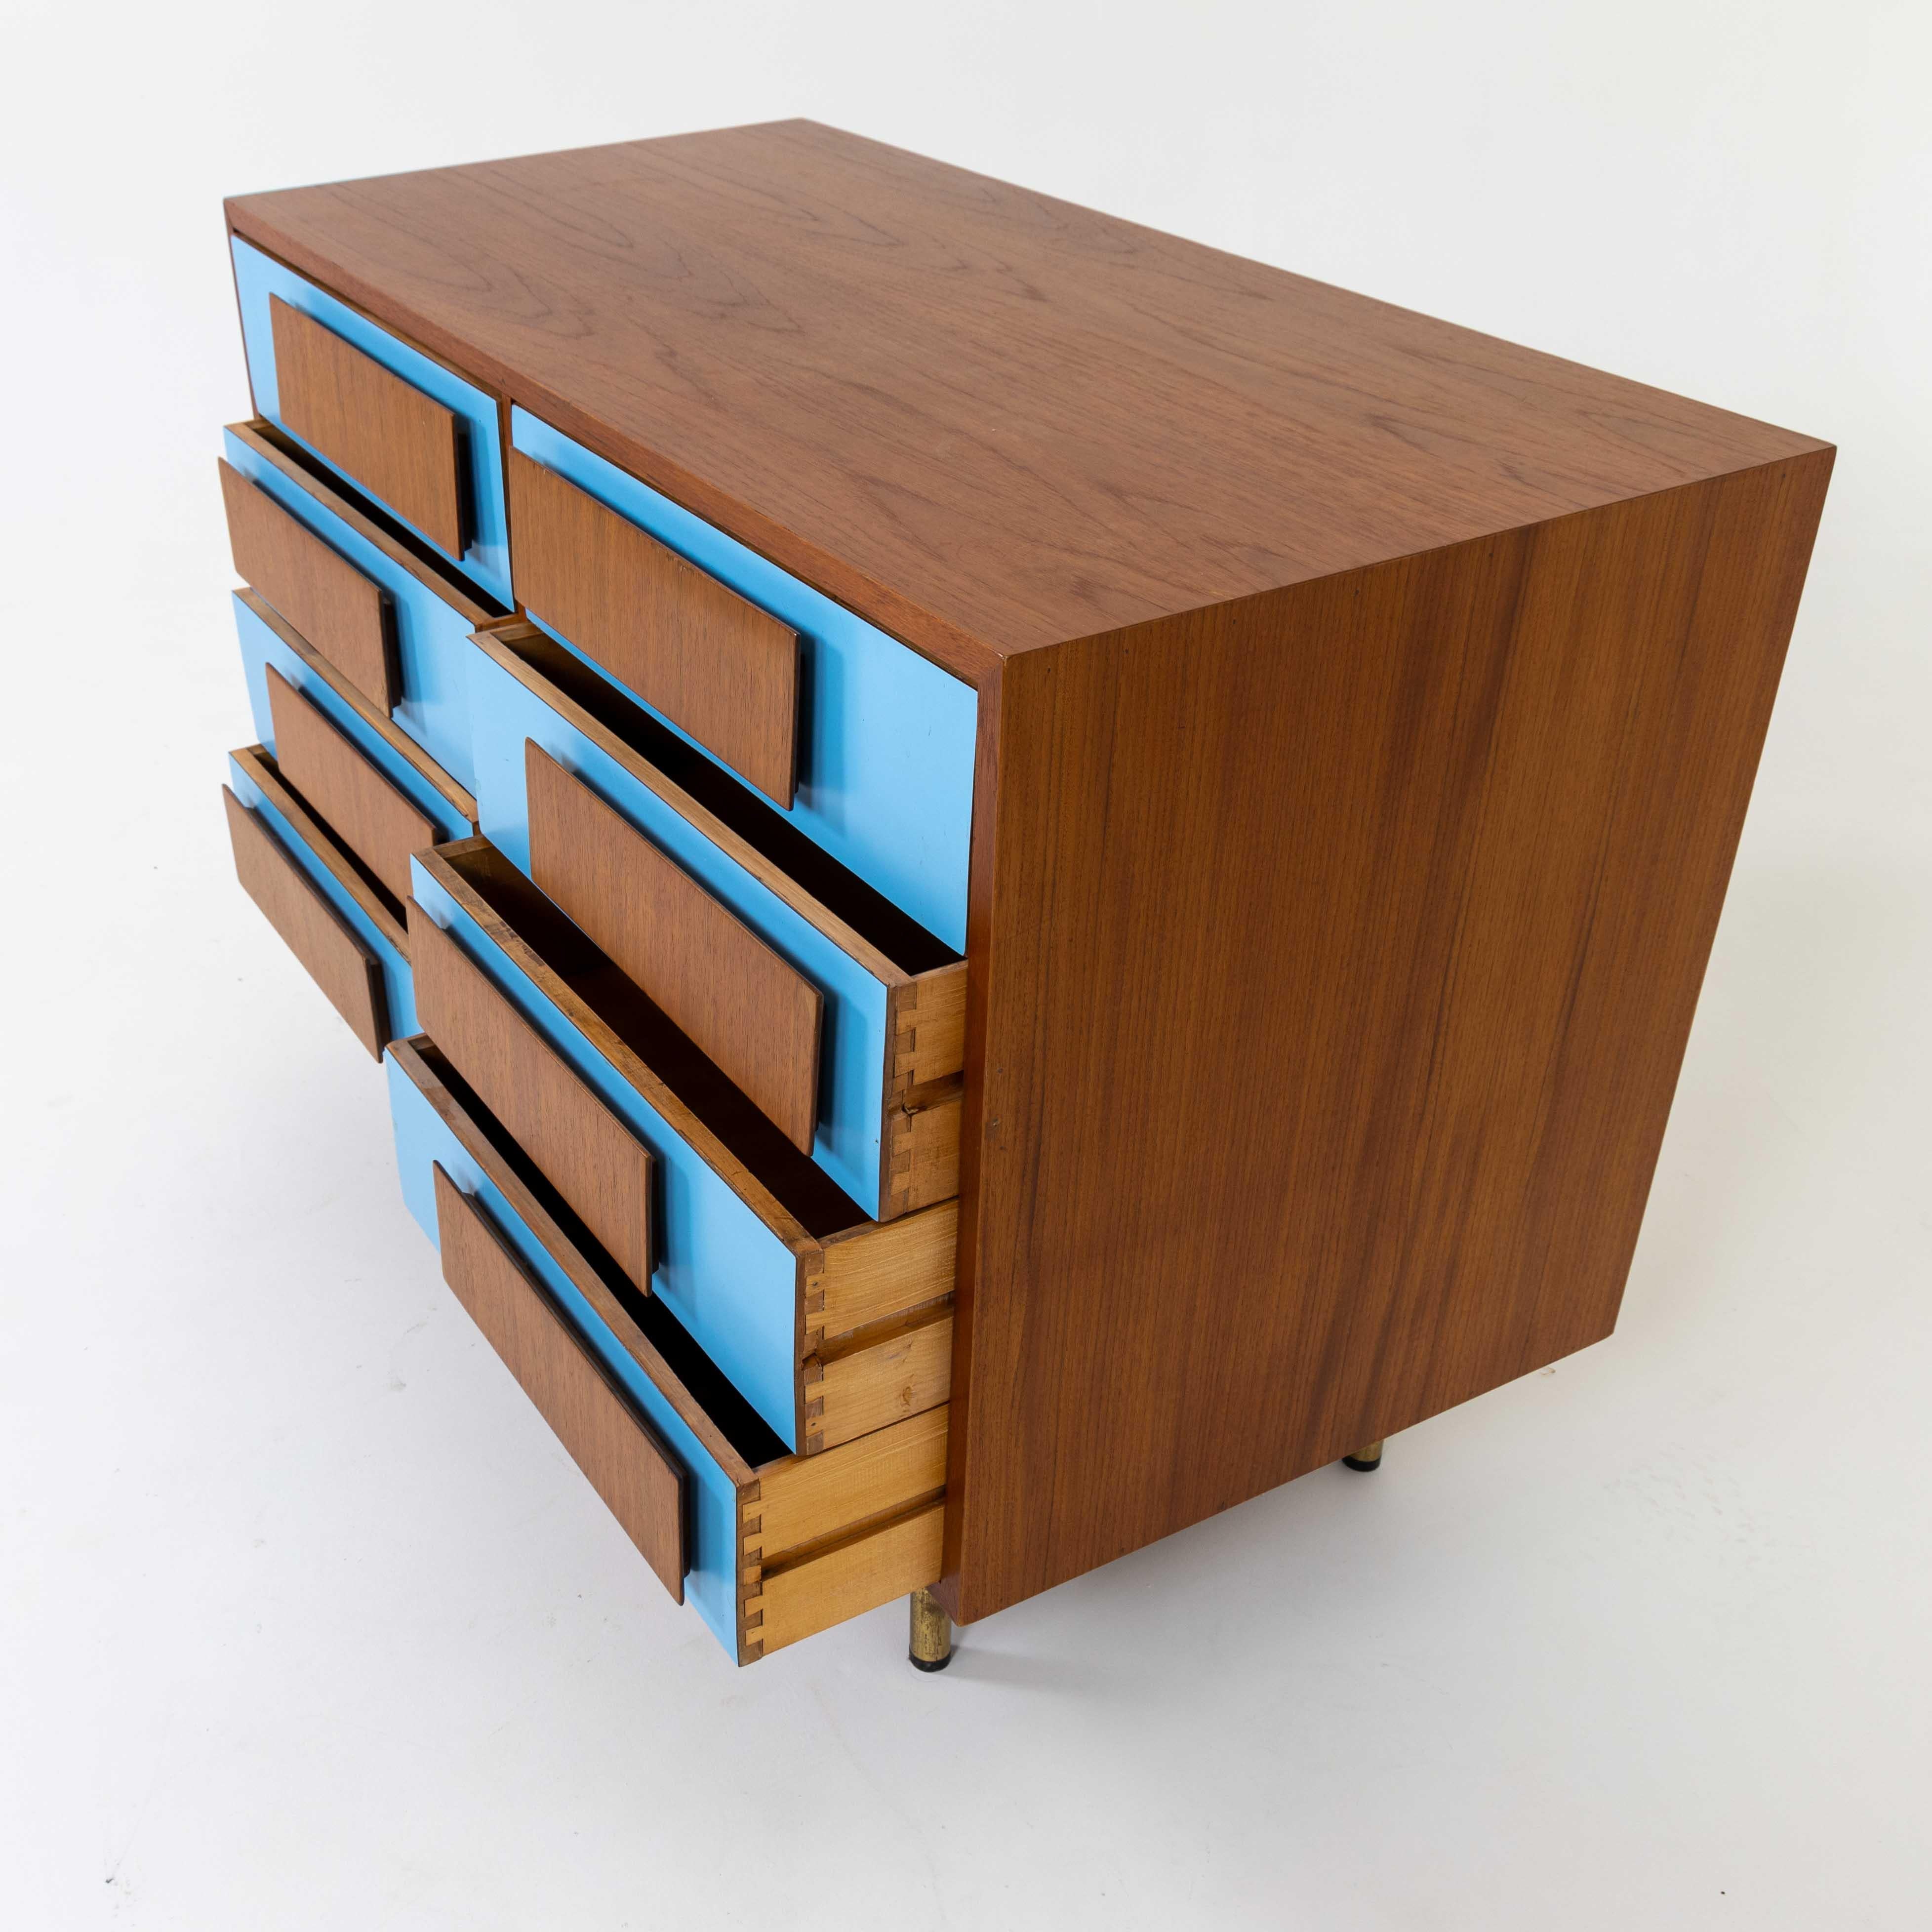 A modernist chest in the style of Gio Ponti. 
Veneer with decorative blue drawer fronts , patinated brass legs , and wood pulls.
